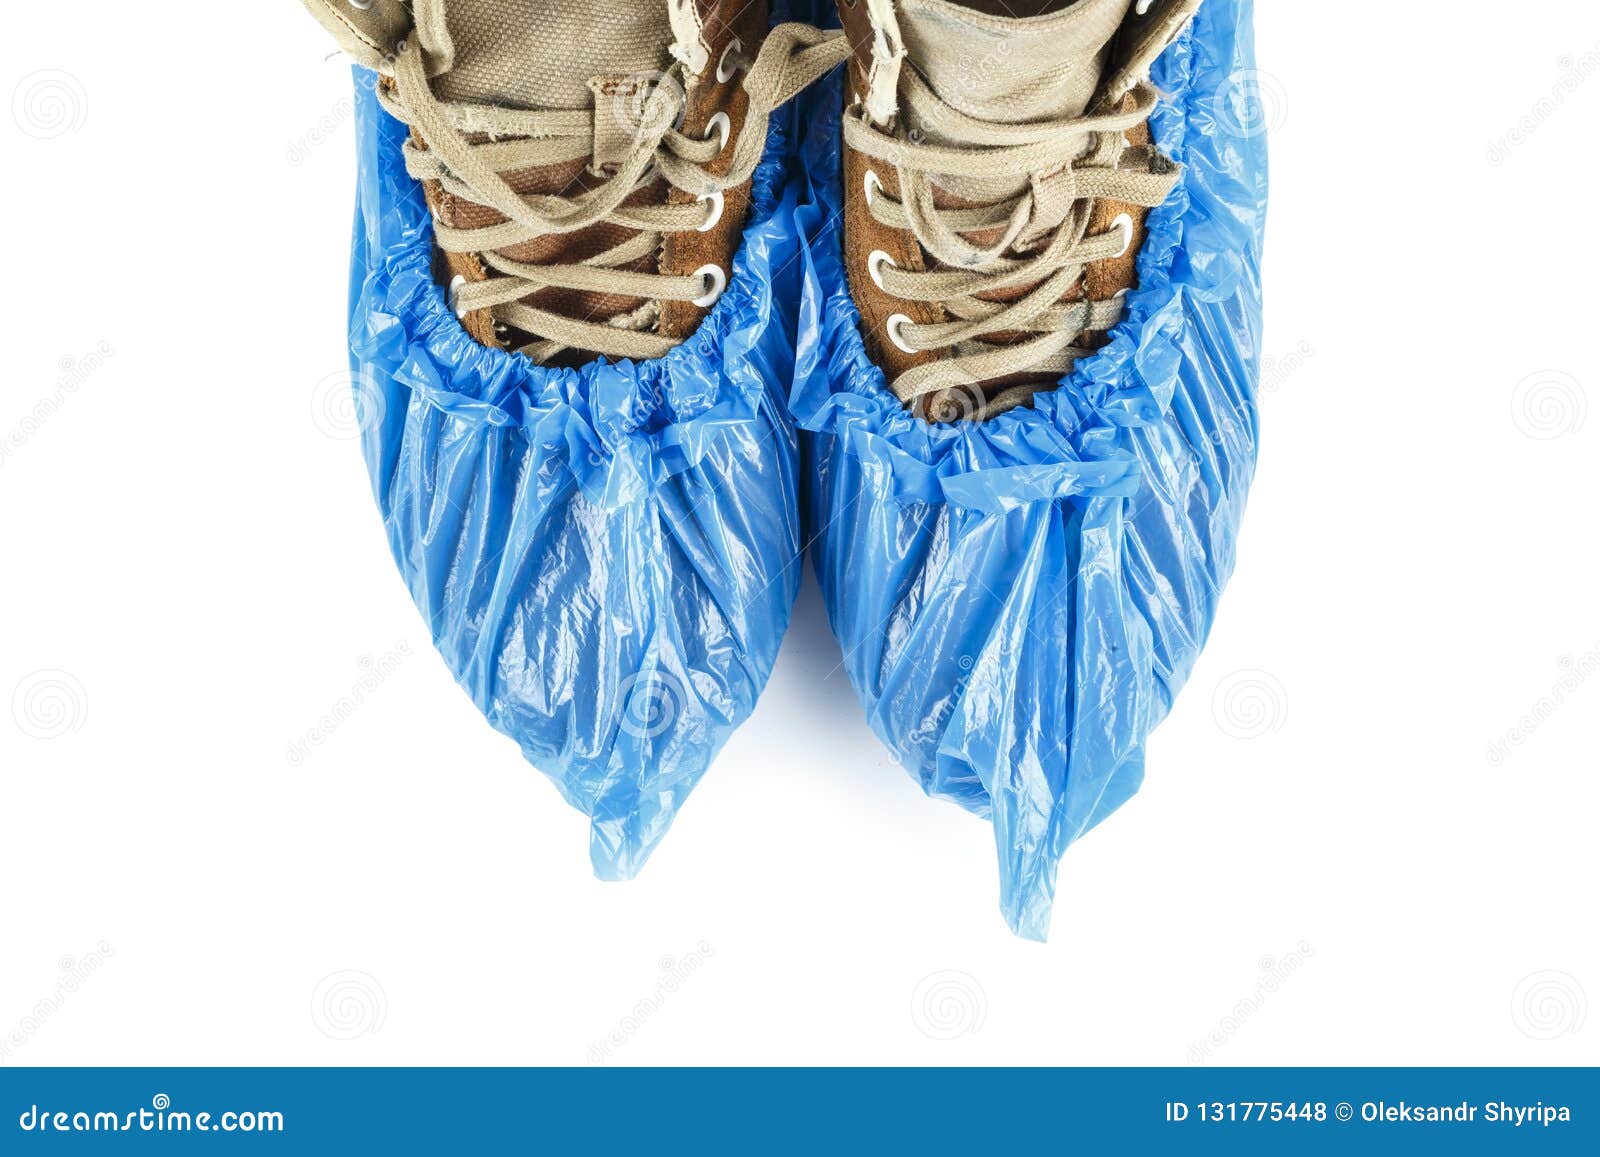 Men`s Winter Boots in Blue Boot Covers Stock Photo - Image of mens ...